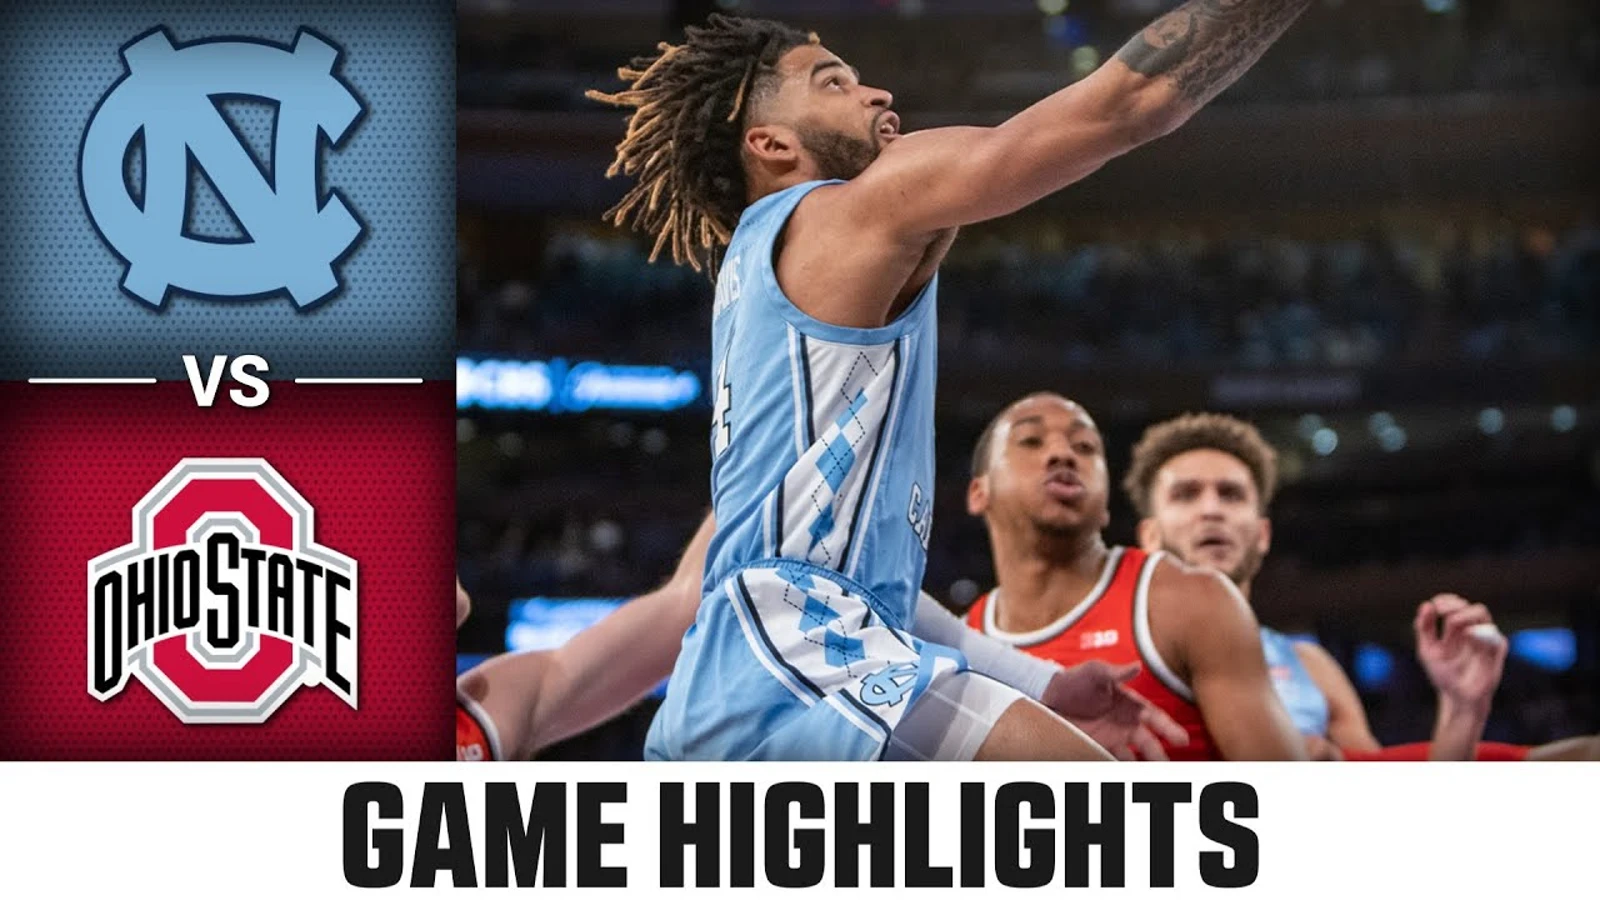 North Carolina beats Ohio State in overtime in college basketball thriller